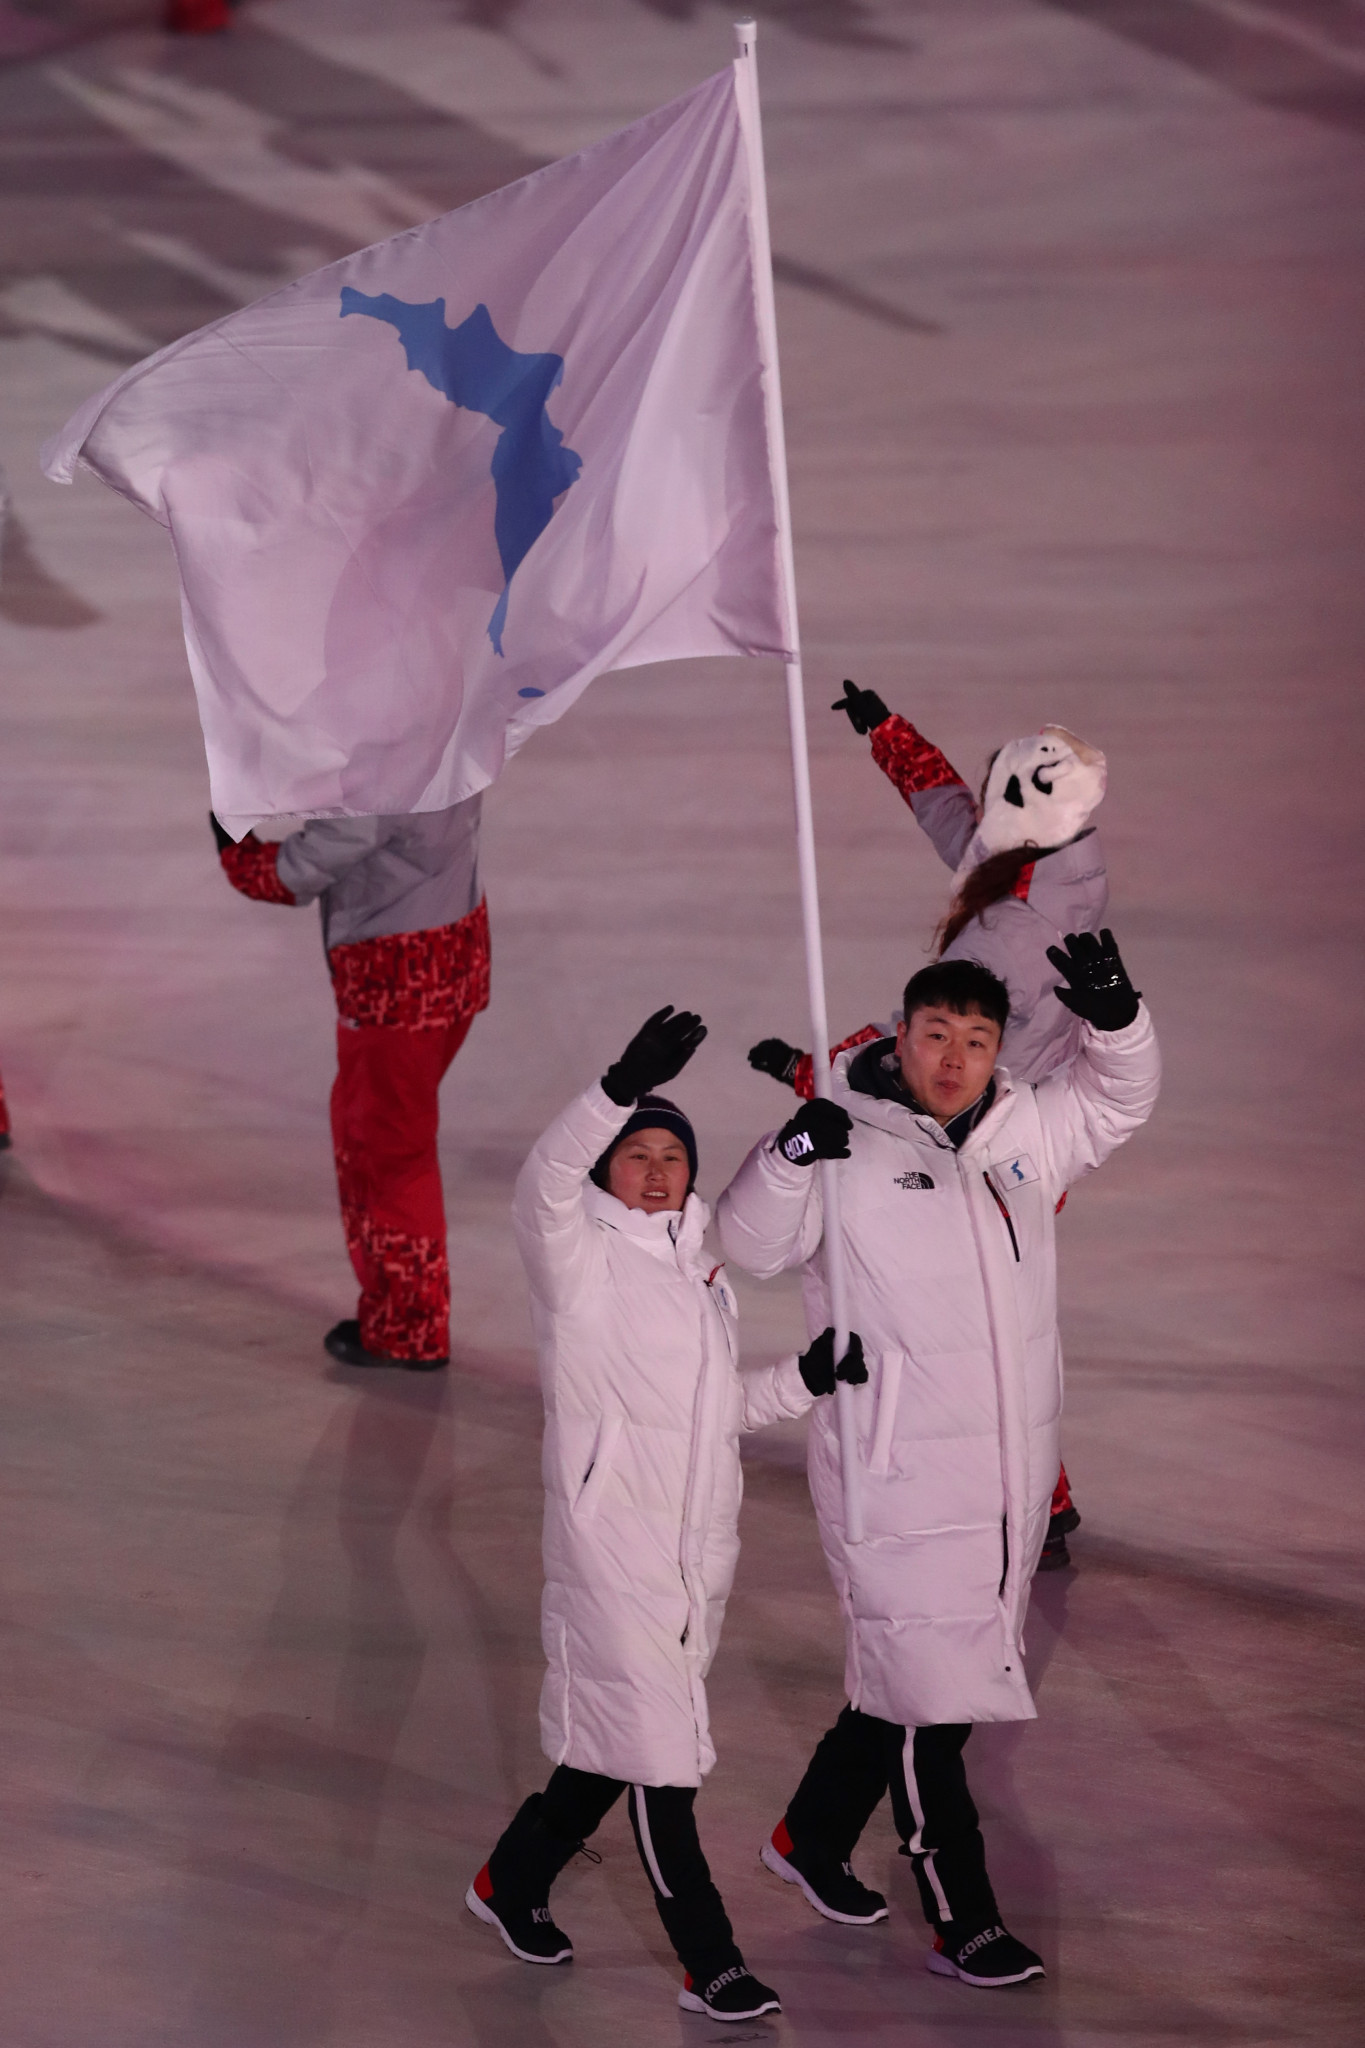 North and South Korea marched together at the Opening Ceremony of the 2018 Winter Olympic Games in Pyeongchang and formed an unified women's ice hockey team ©Getty Images